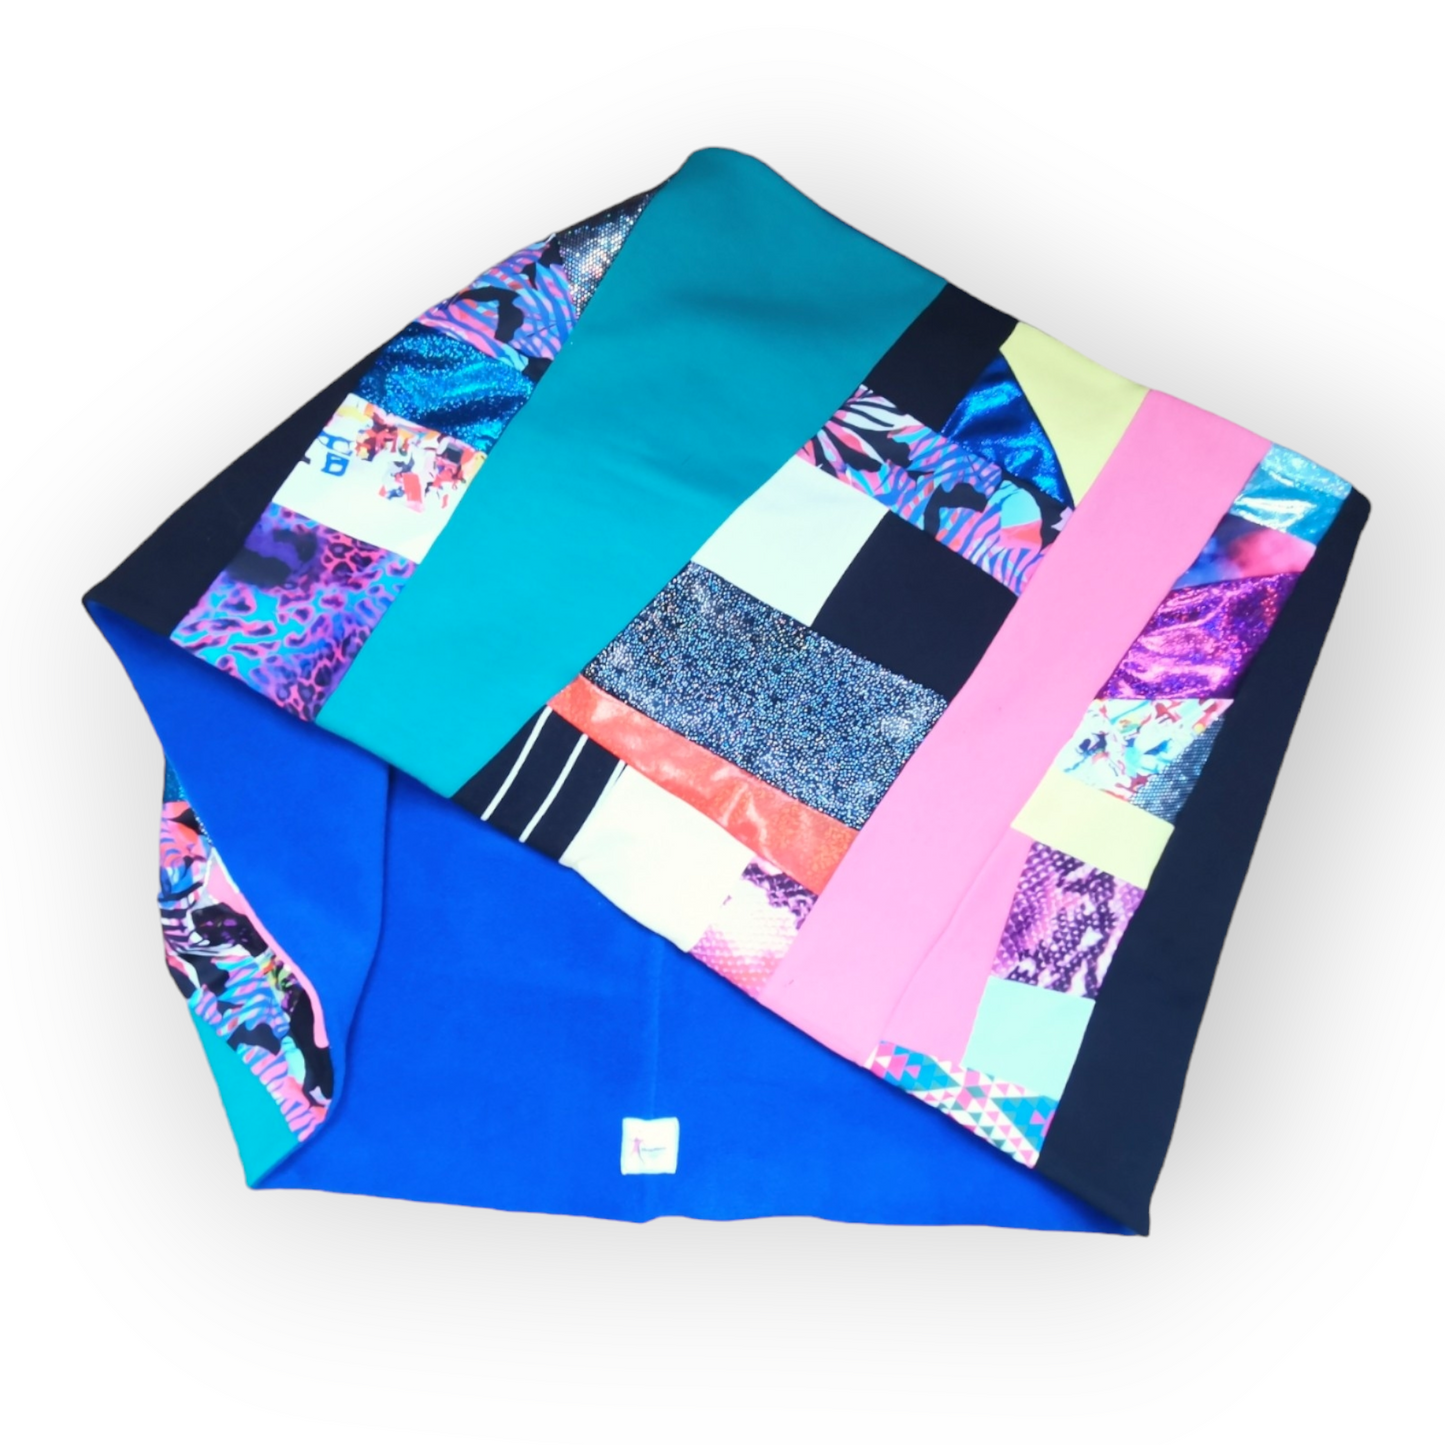 Large circular scarf made from recycled scrap fabrics.  Lined in blue fleece and including bright, printed, multi coloured patchwork panels and large colour blocks in turquoise, pink, black and blue. Pictured folded to show the outer and the lining on a white background. 